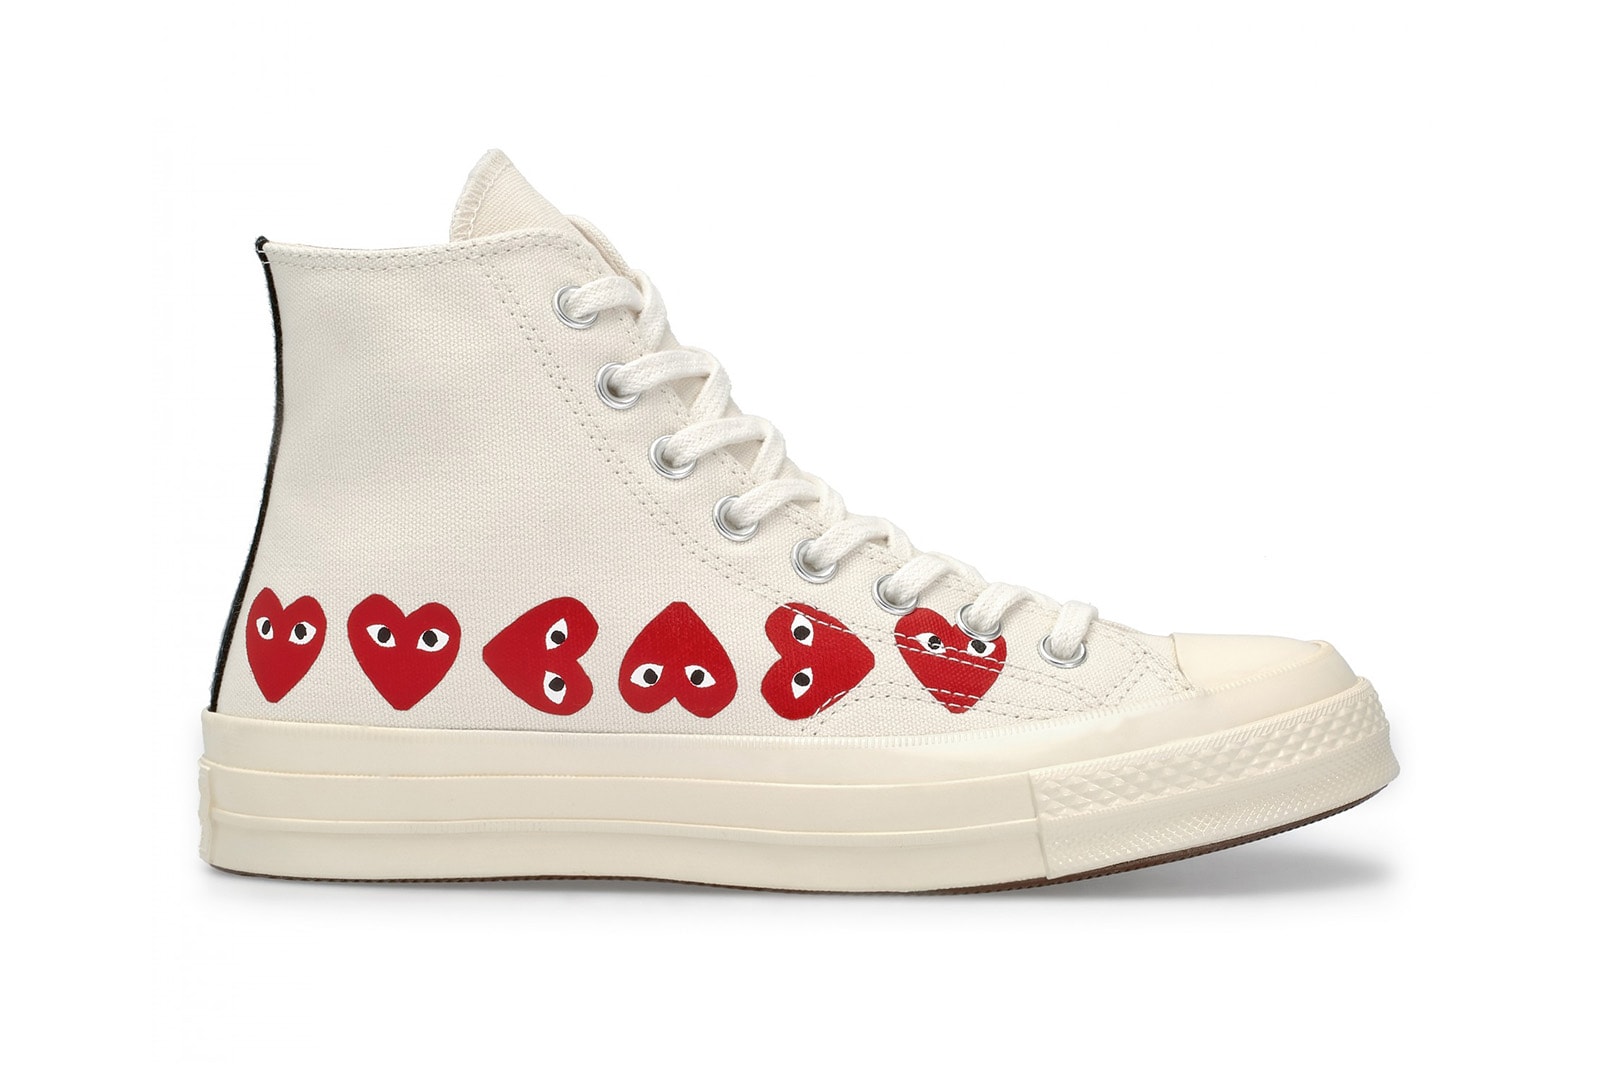 CdG PLAY x Converse Chuck Taylor All Star Release Date Details Shoes Trainers Kicks Sneakers Boots Footwear Cop Purchase Buy Soon Available Dover Street Market London White Khaki Repeated Heart Pattern